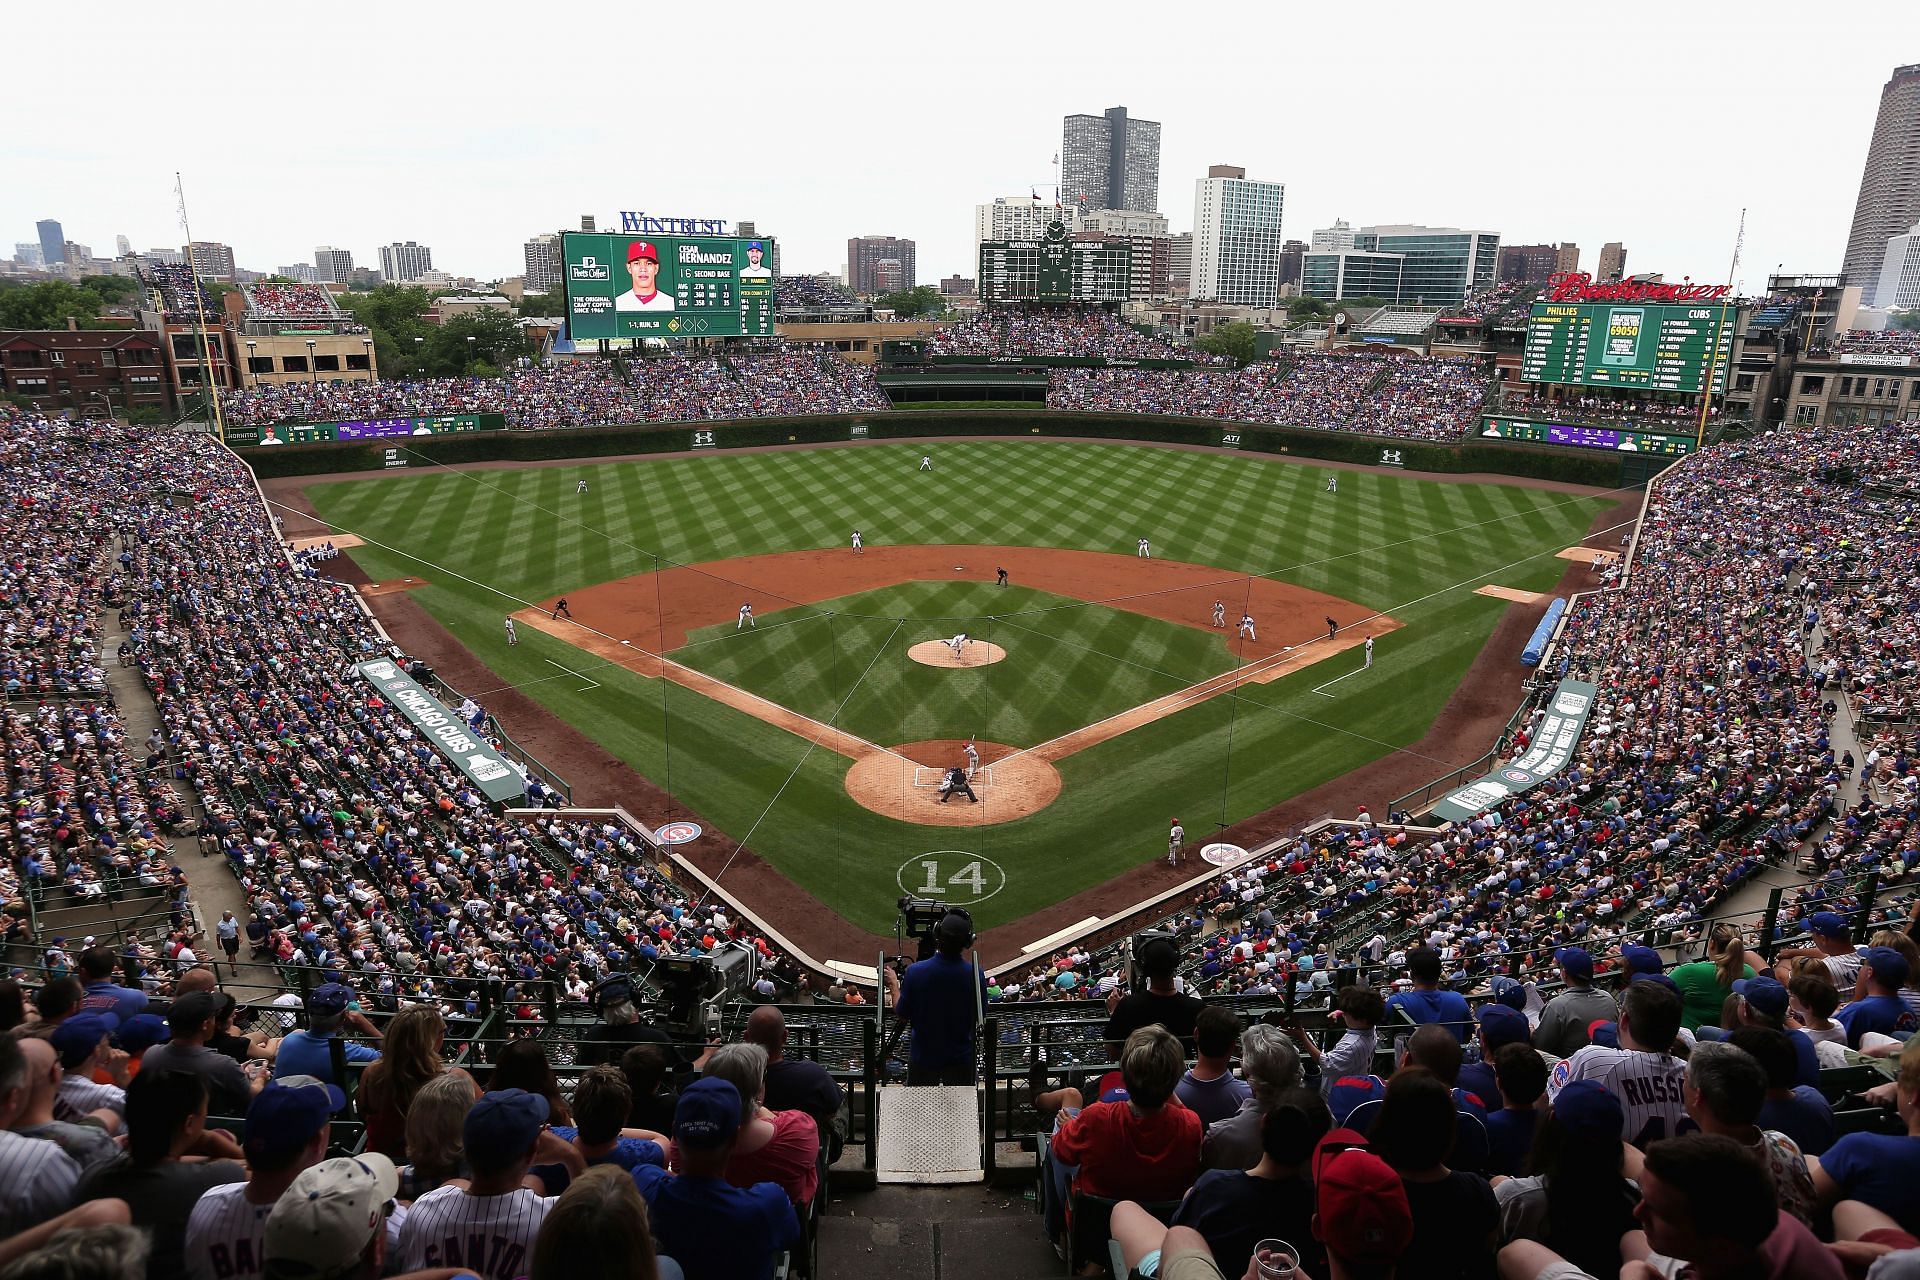 Top 5 Chicago Cubs wins on opening day